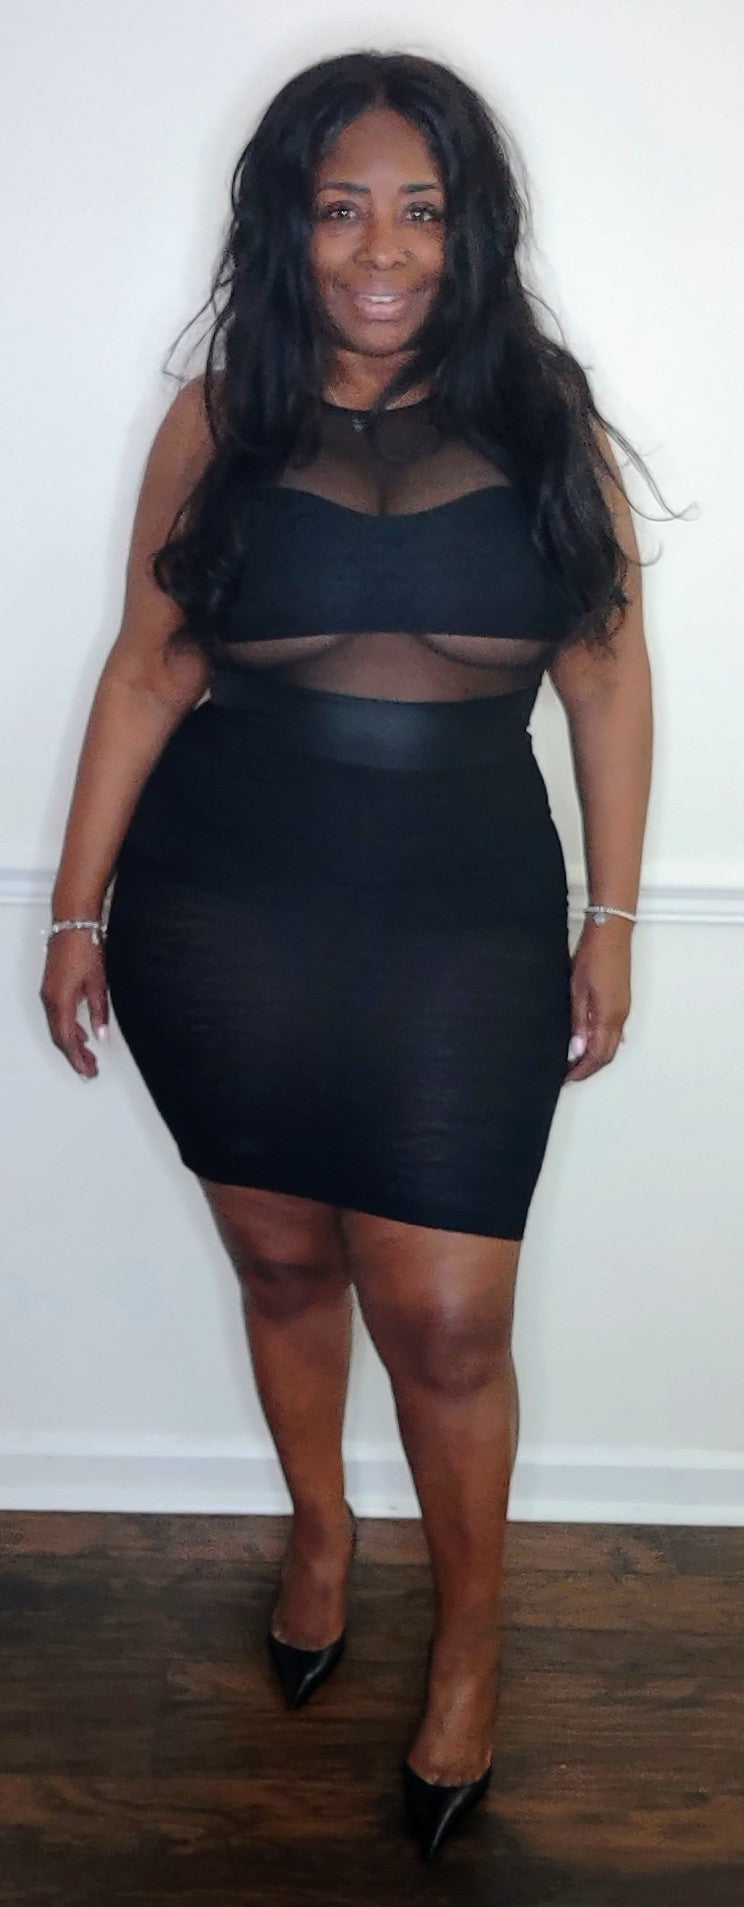 The Black Party Dress